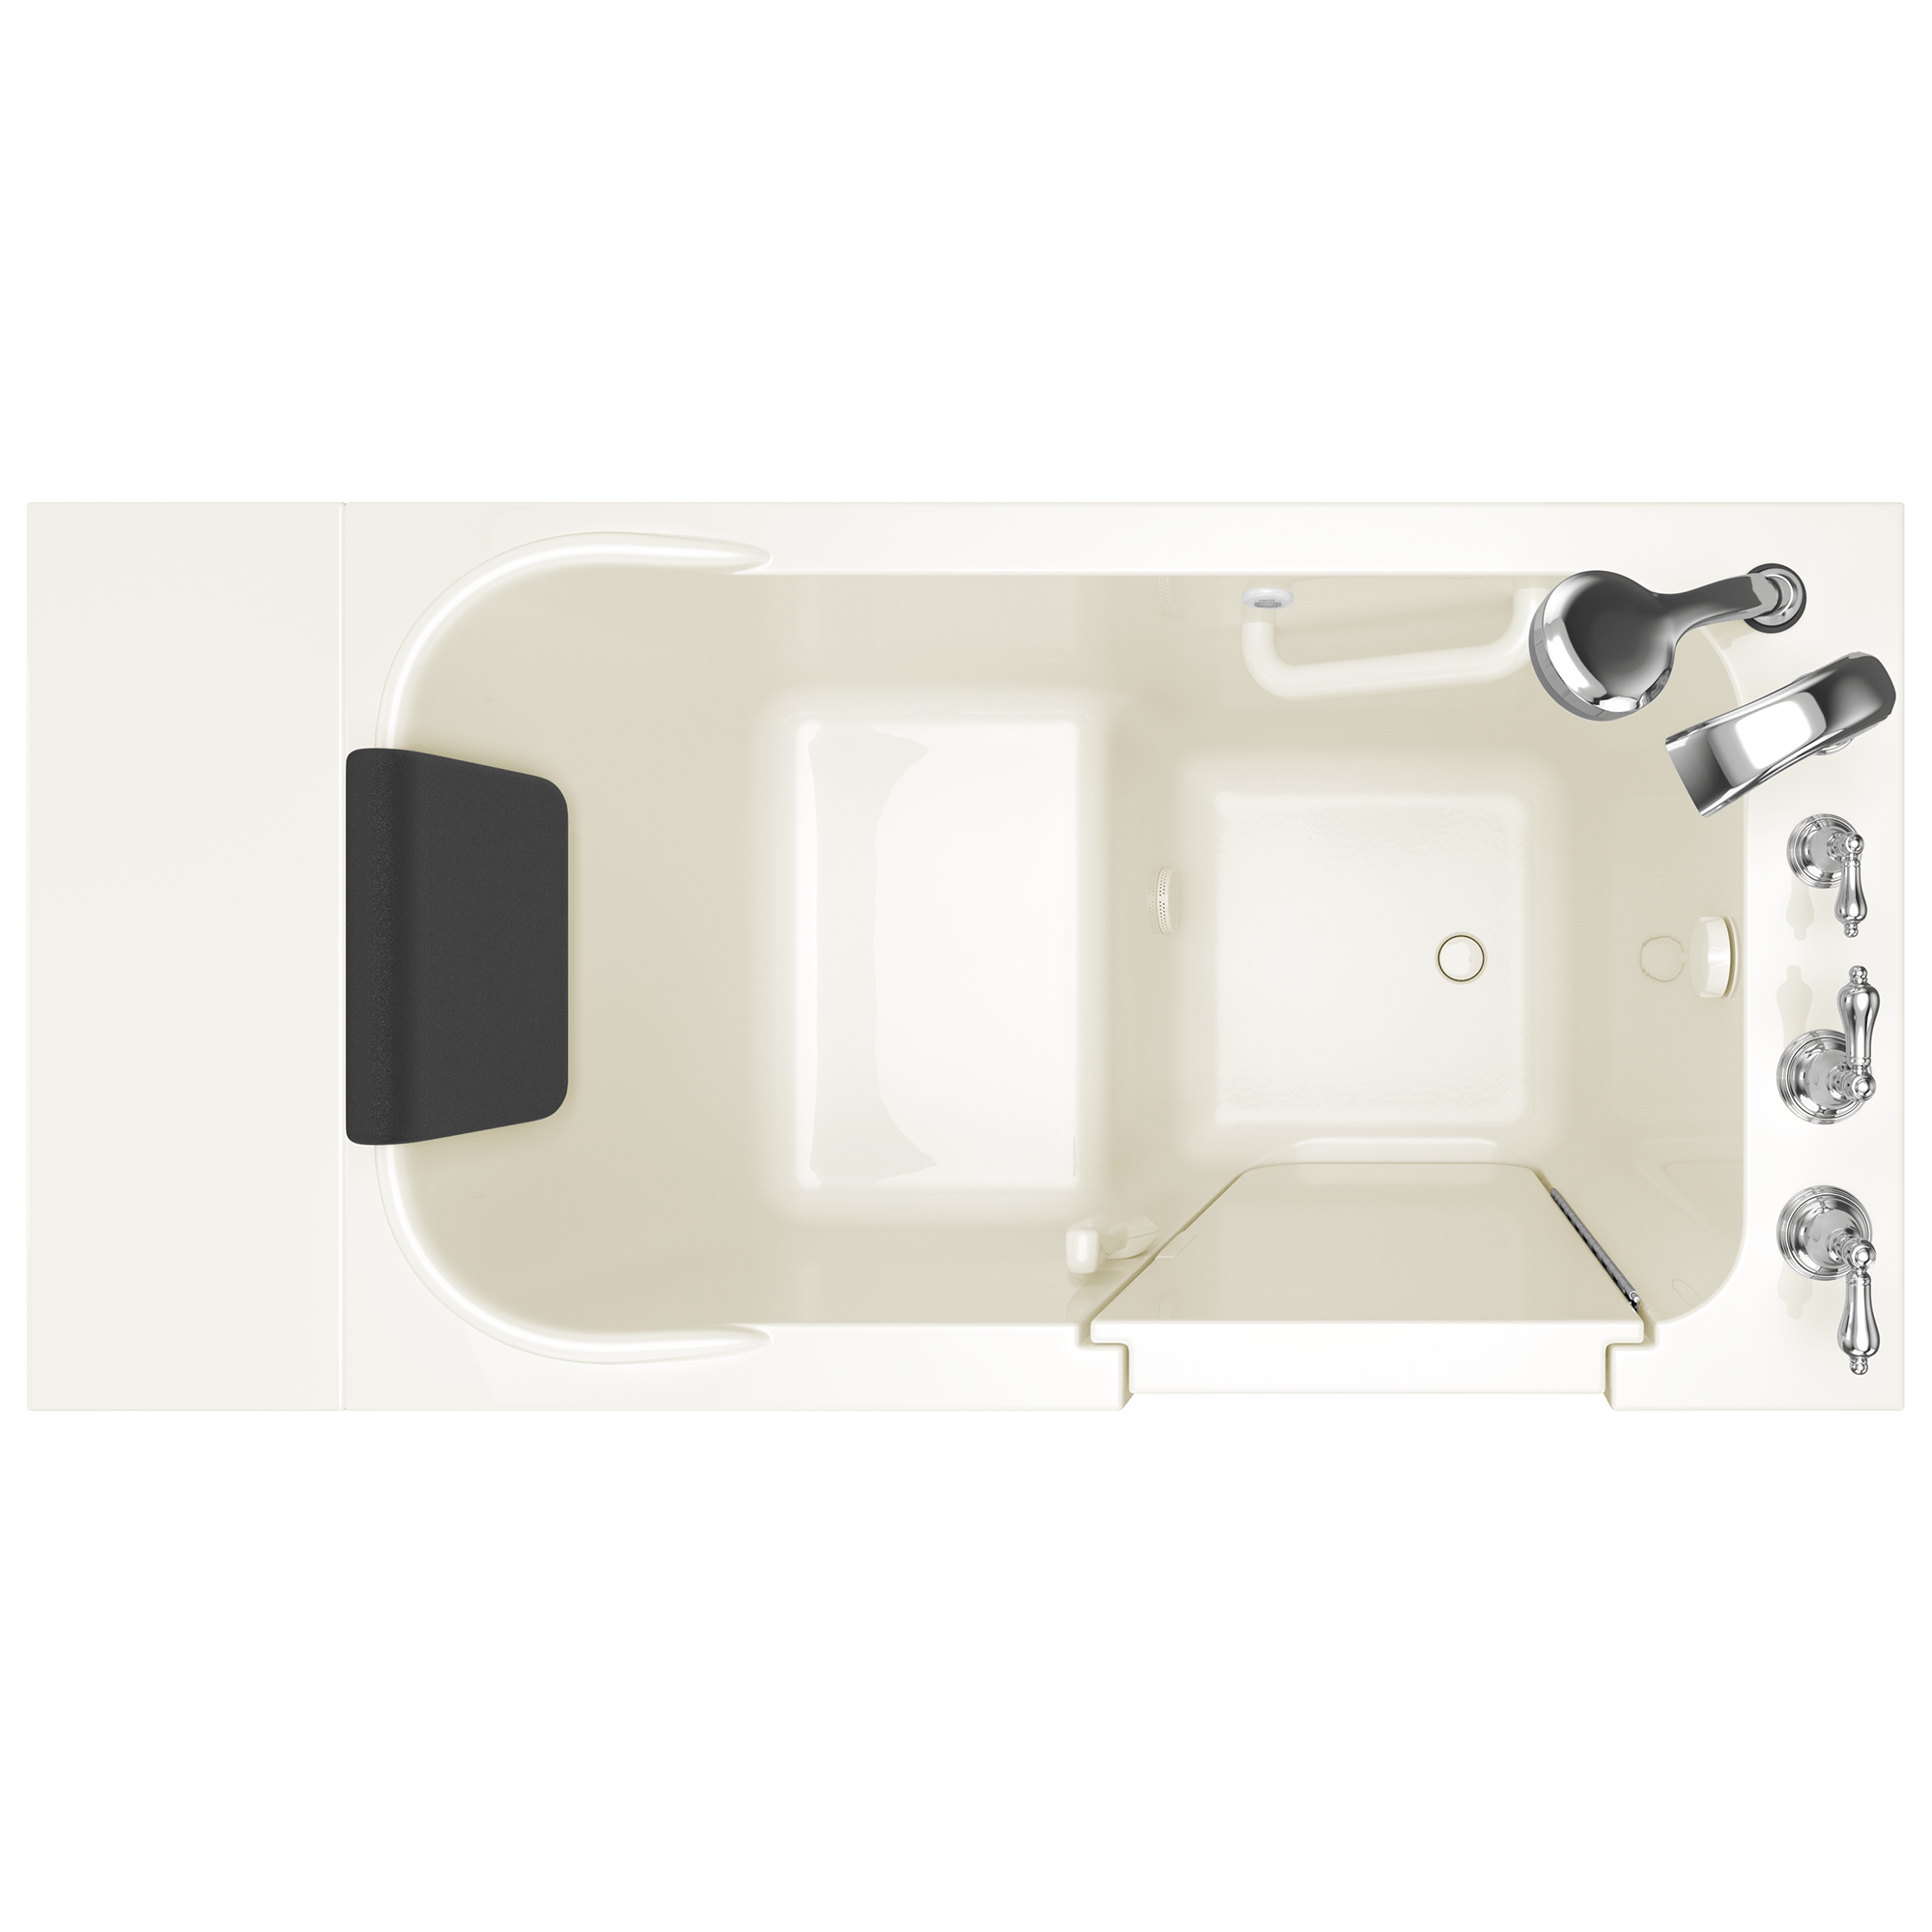 Gelcoat Premium Series 28 x 48-Inch Walk-in Tub With Soaker System - Right-Hand Drain With Faucet